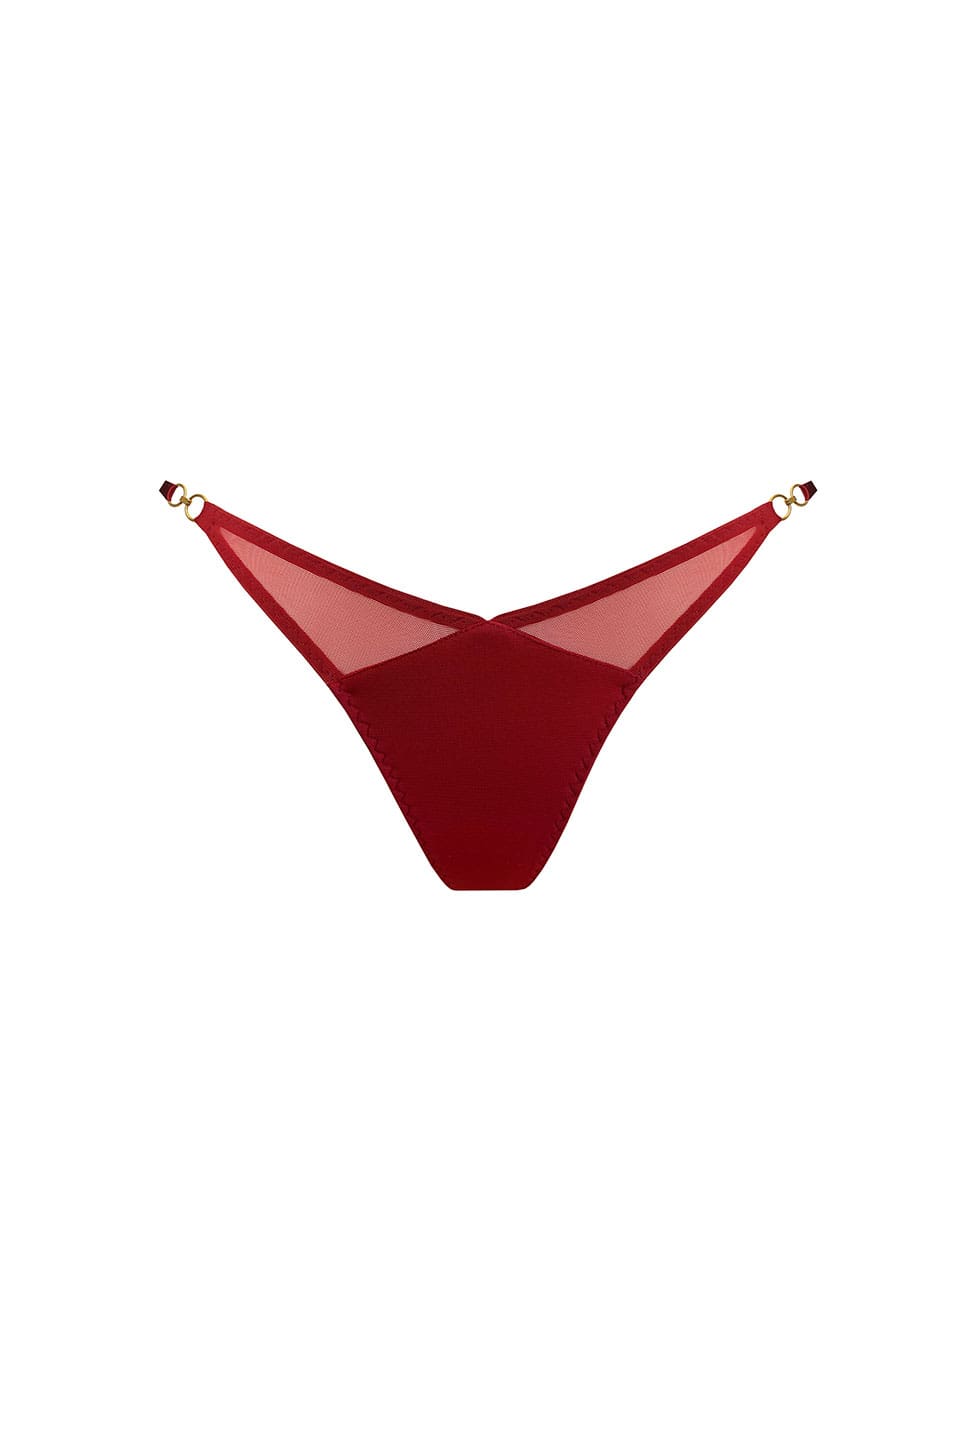 Atelier Bordelle Kleio Thong Burnt Red front. Product gallery 1